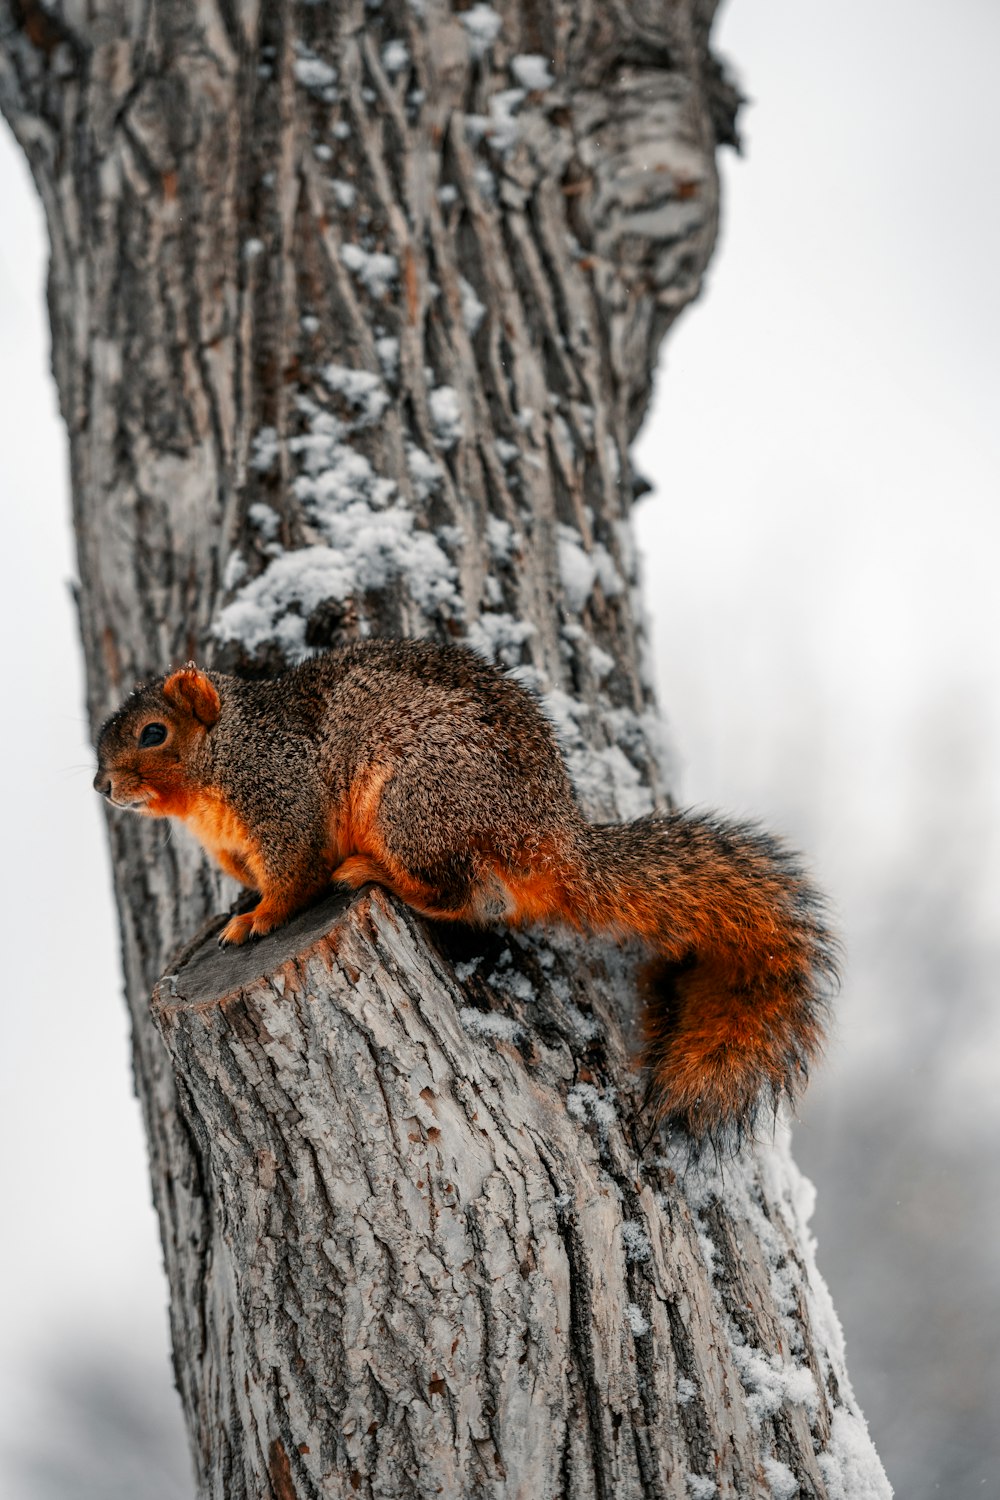 a squirrel sitting on a tree trunk in the snow